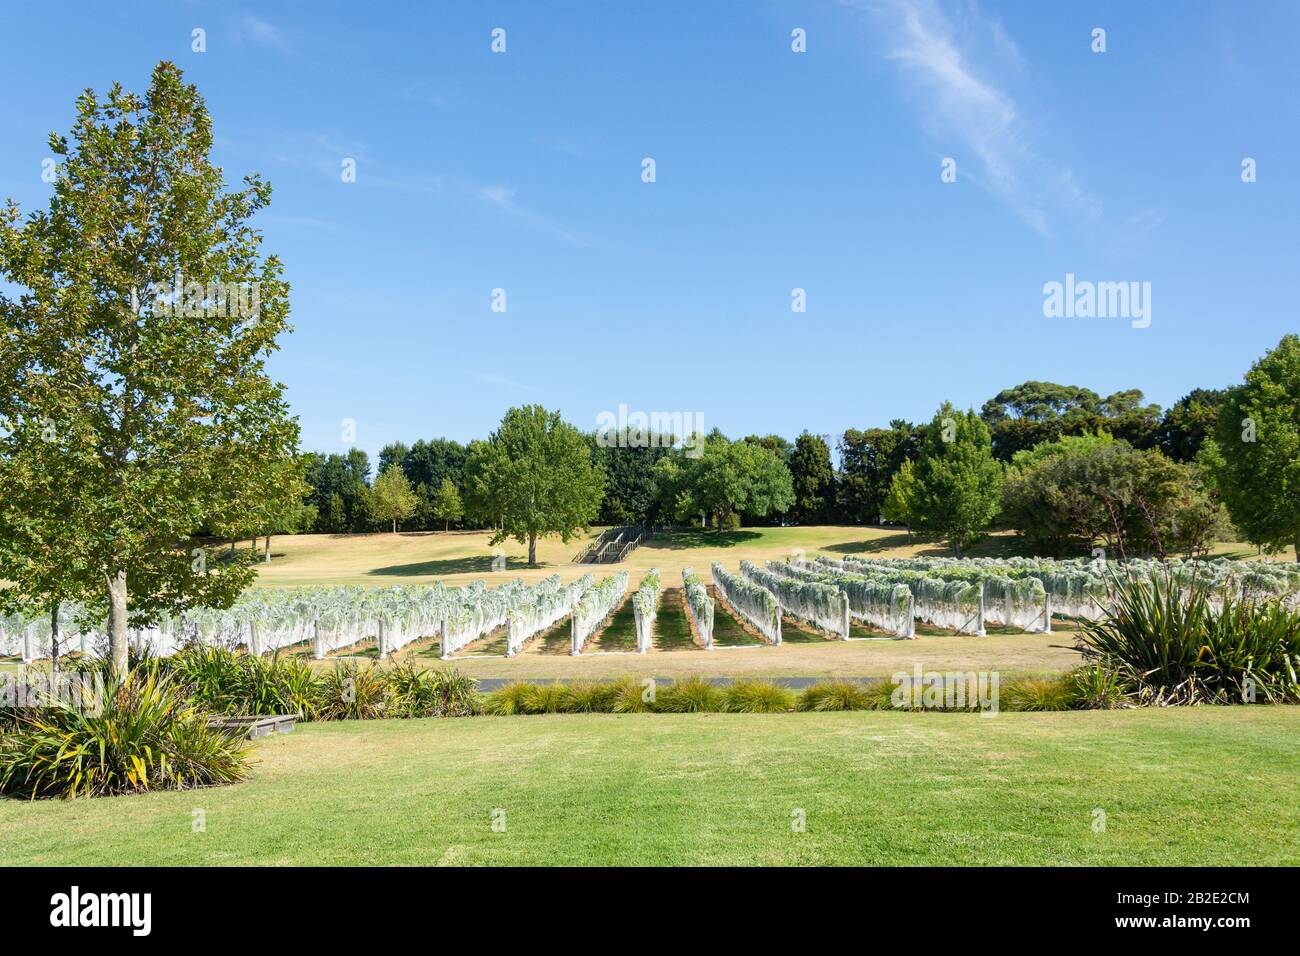 Rows of vines at Villa Maria Auckland Winery, Mangere, Auckland, Auckland Region, New Zealand Stock Photo